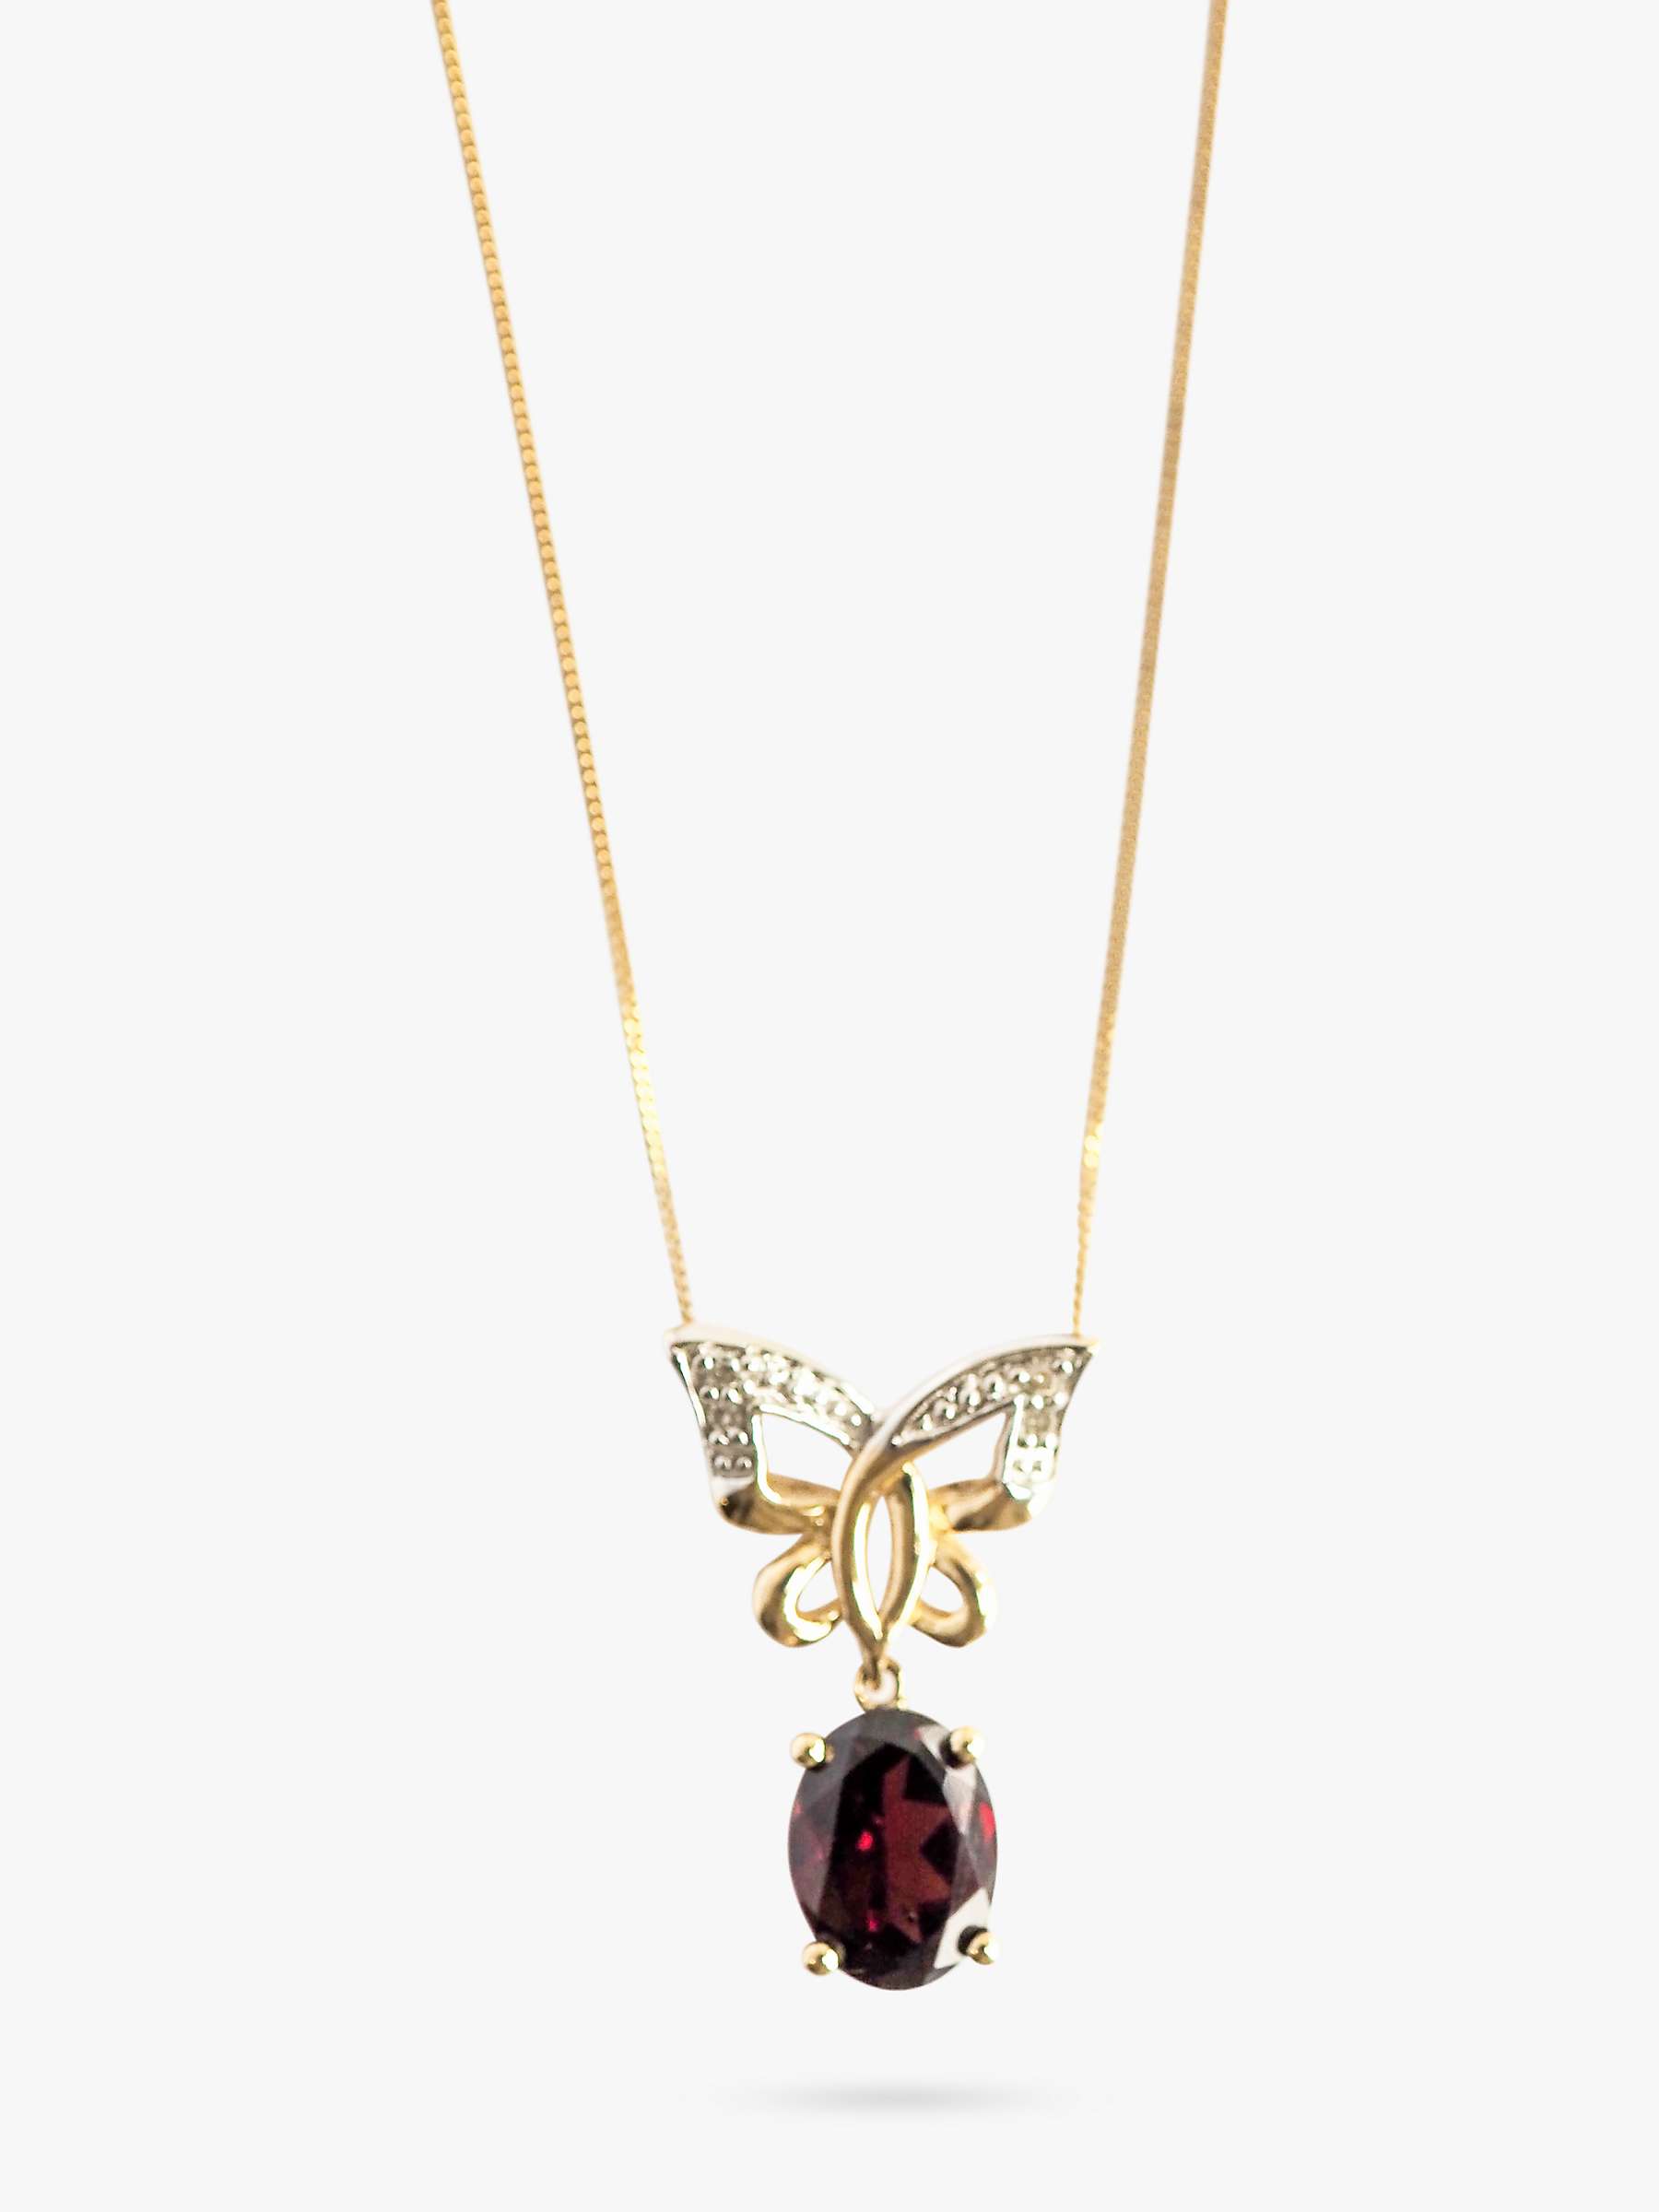 Buy L & T Heirlooms Second Hand 9ct Yellow Gold Garnet and Diamond Butterfly Pendant Necklace, Gold Online at johnlewis.com